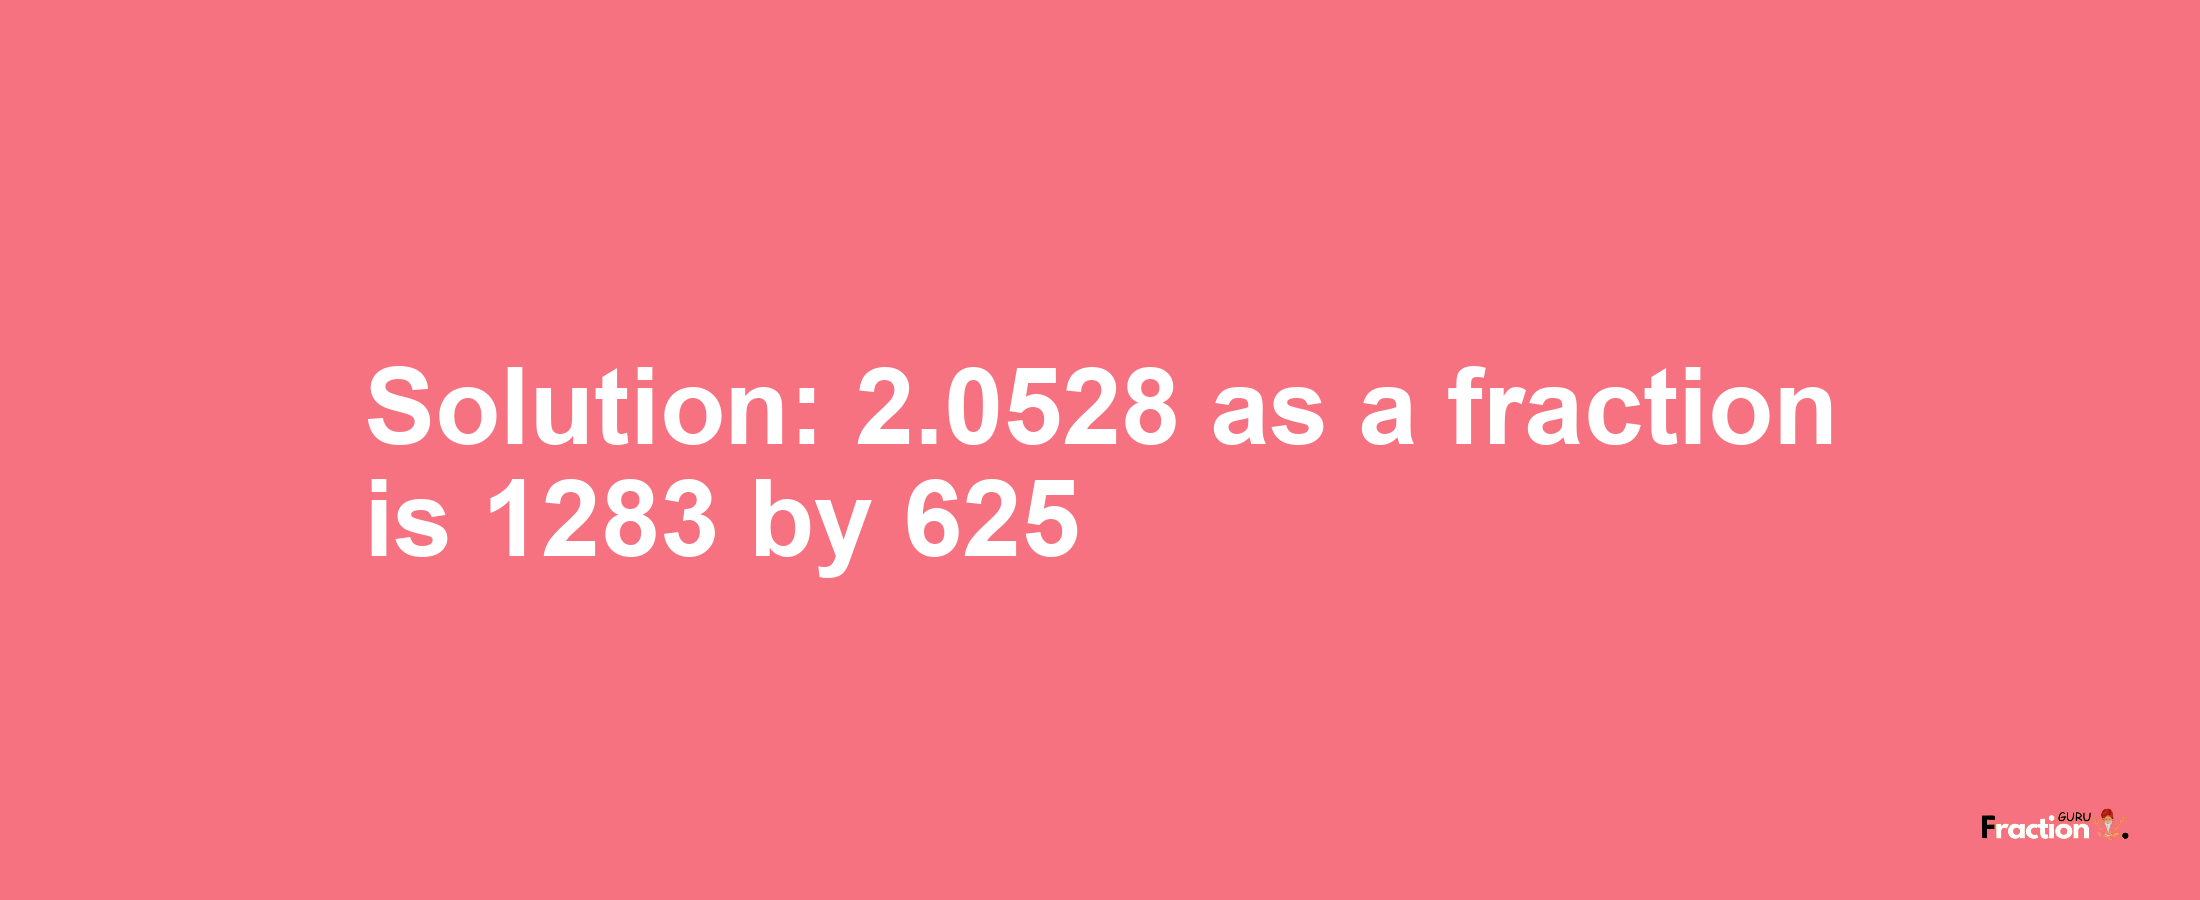 Solution:2.0528 as a fraction is 1283/625